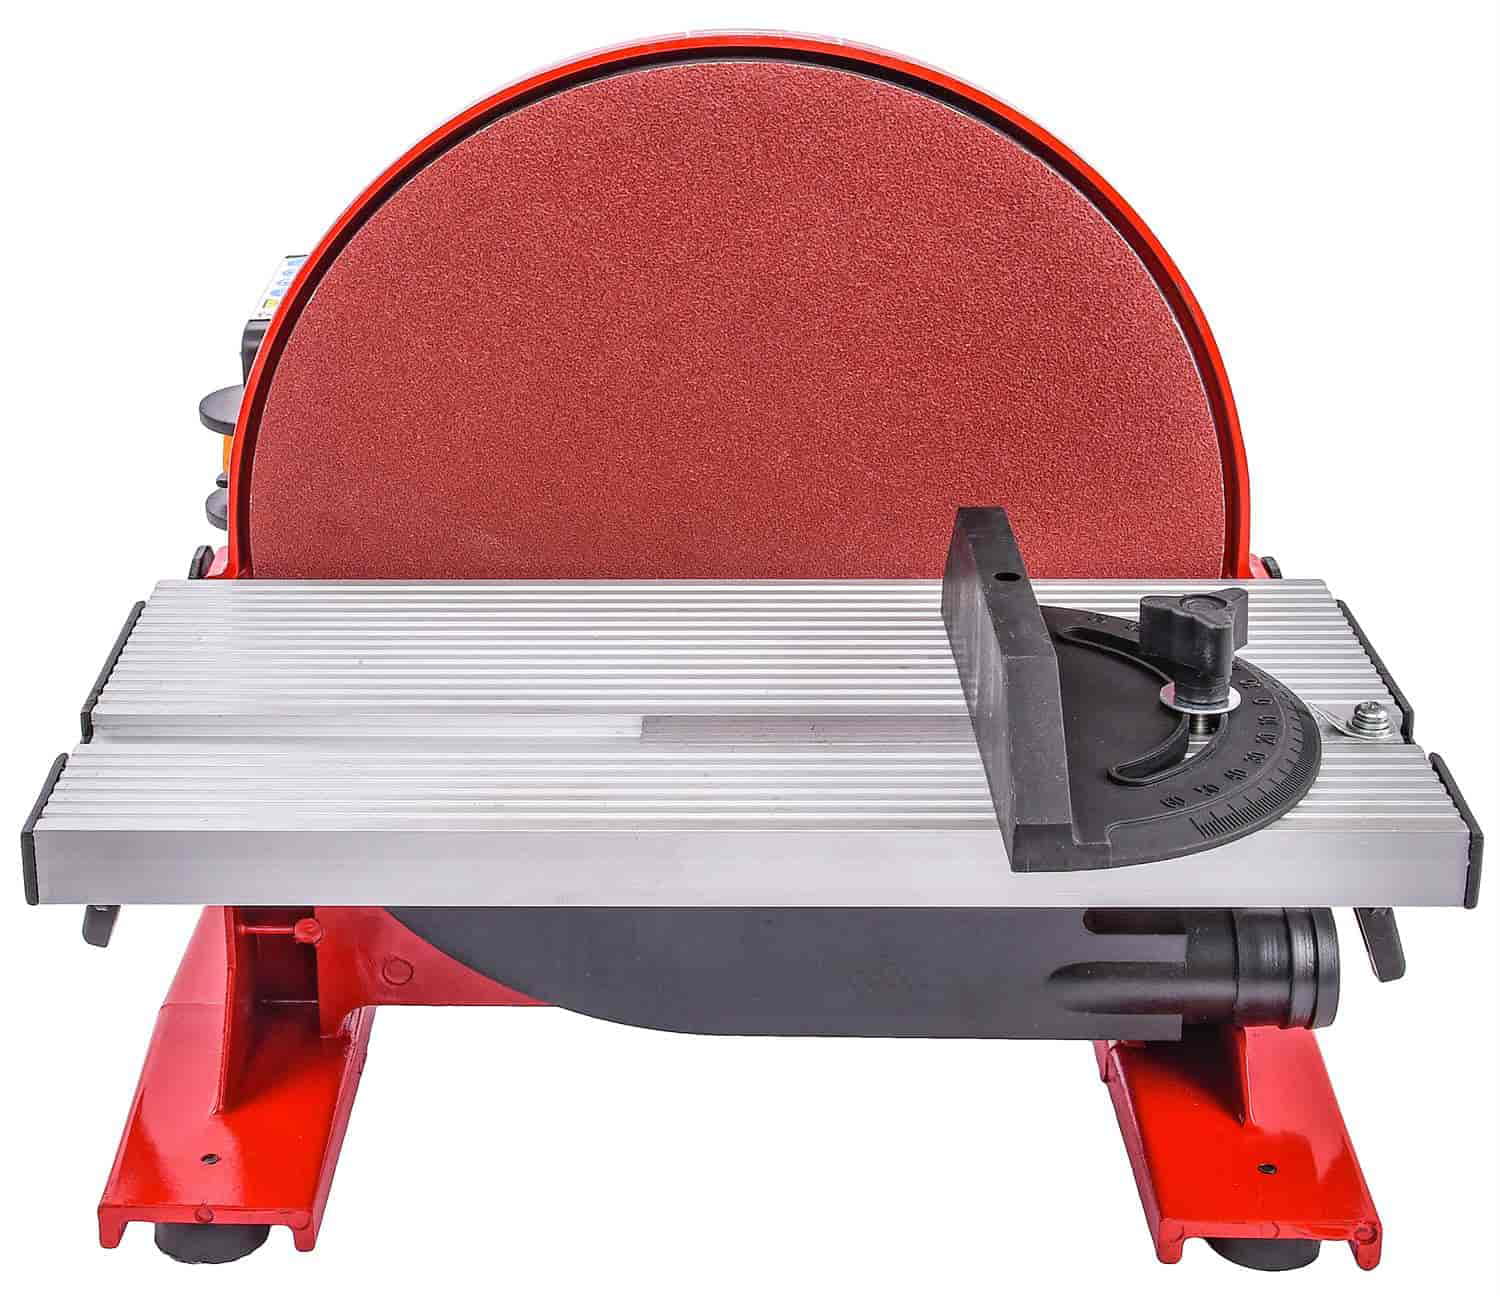 No-Load RPM 81752 Accepts 10 Motor HP in. 3/4 1 Disc Sander JEGS Speed 110 750 V